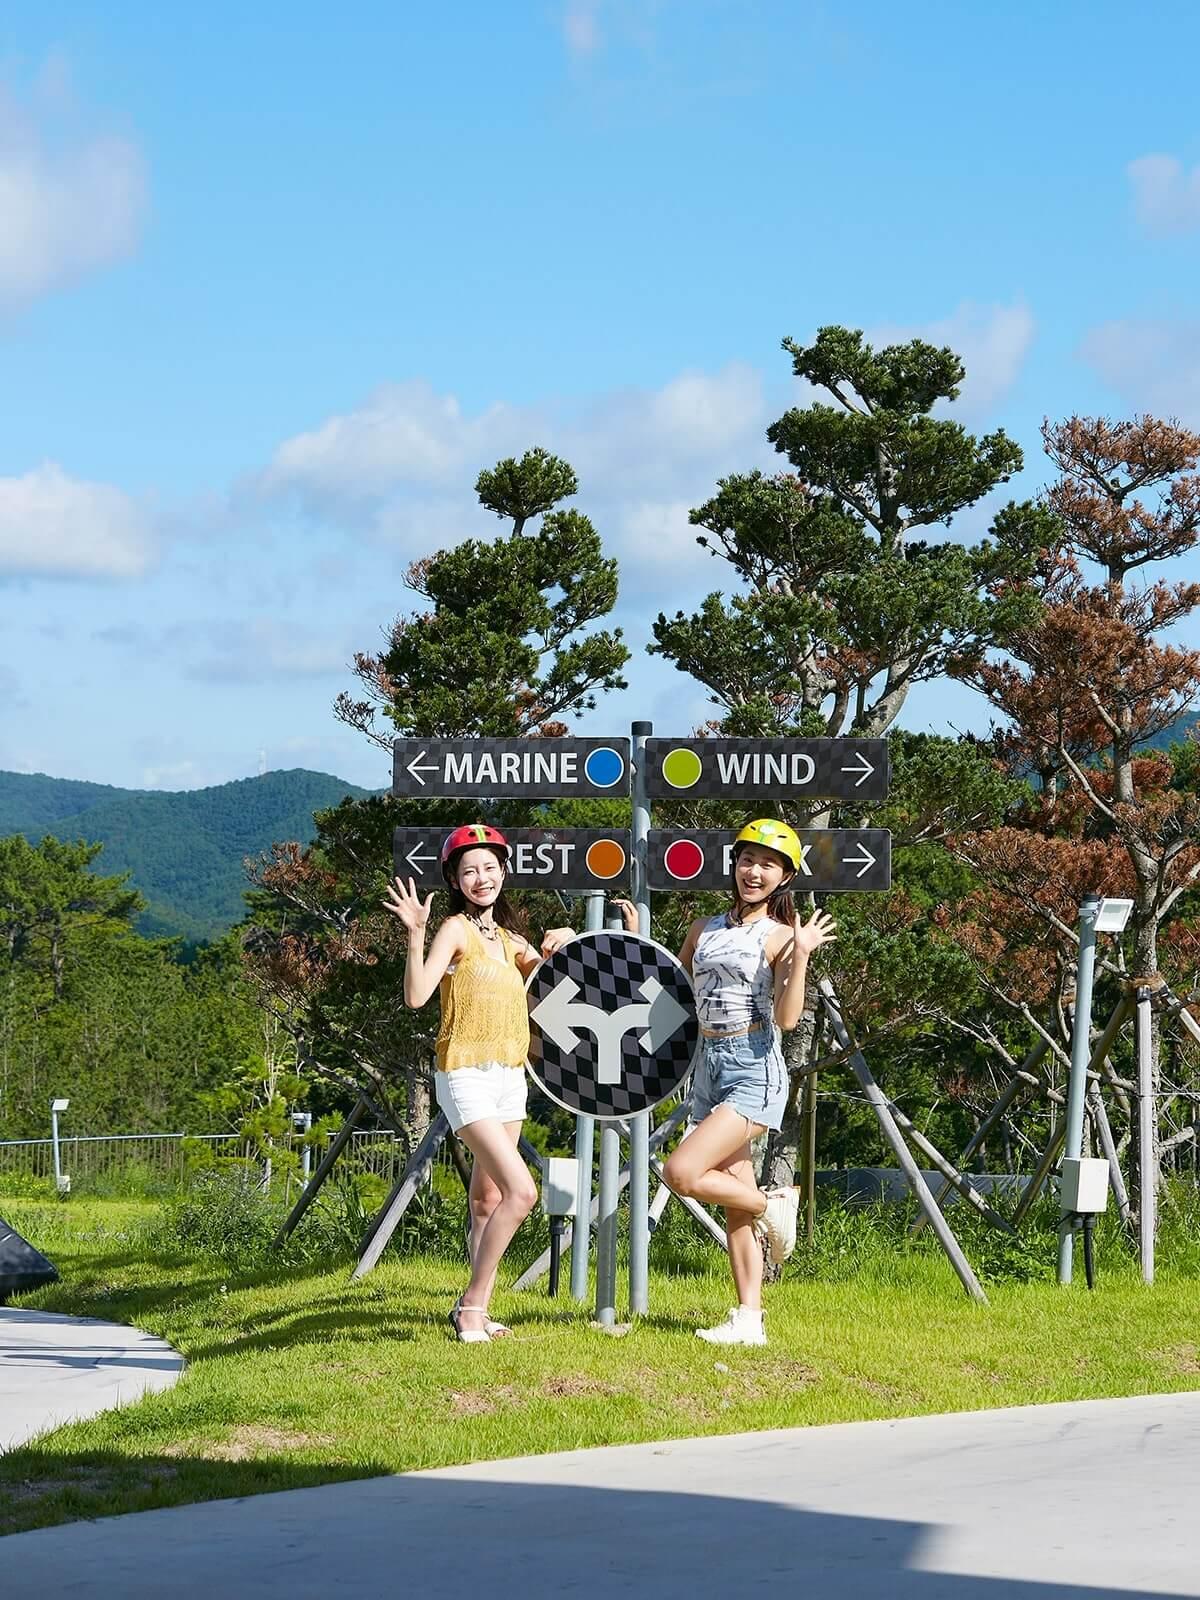 Two ladies pose for a photo in front of Luge track signage.